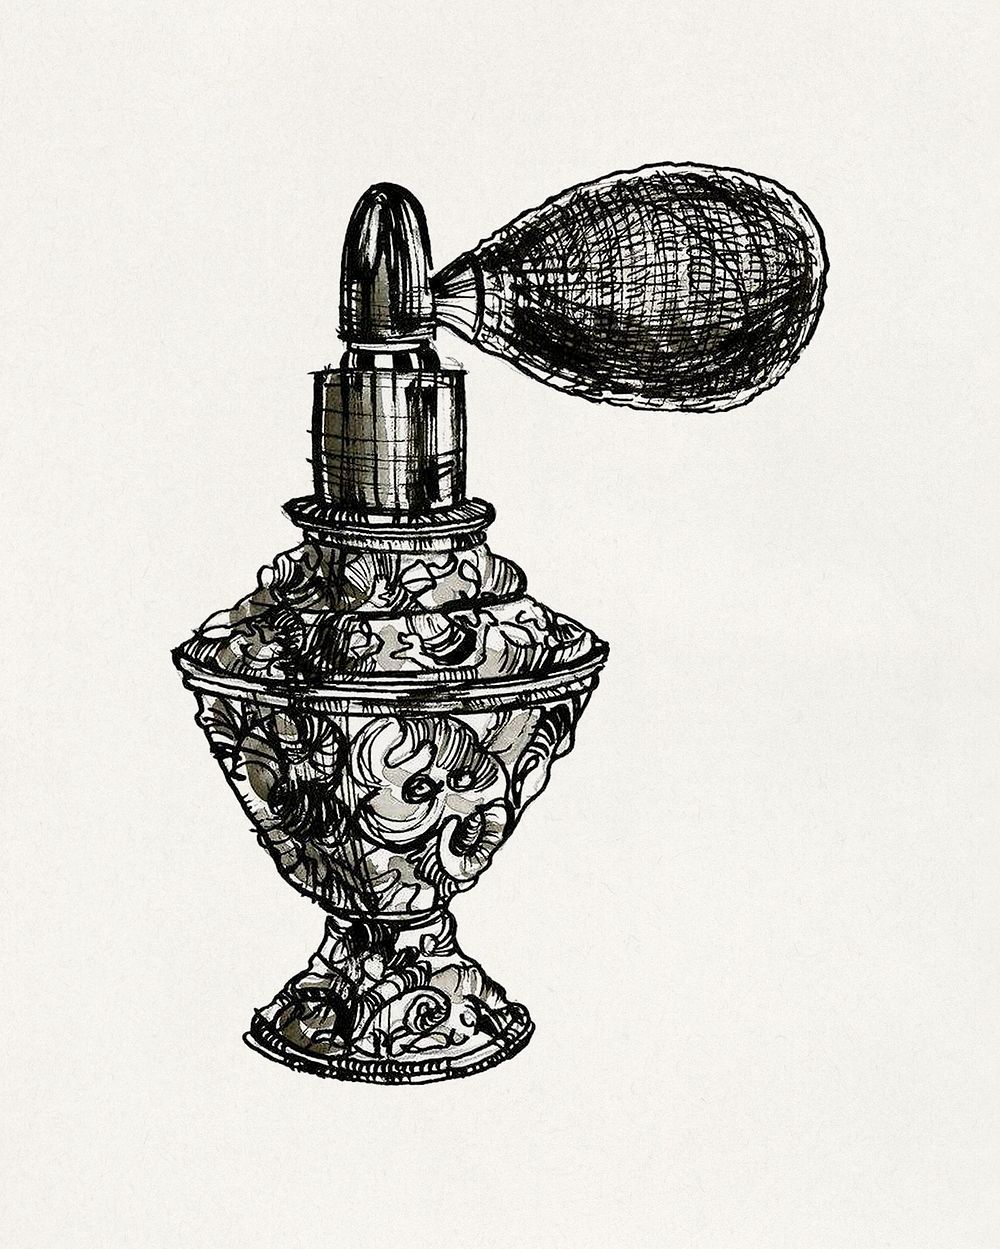 Perfume bottle (2014) drawing by David Ring. Original public domain image from Wikipedia. Digitally enhanced by rawpixel.